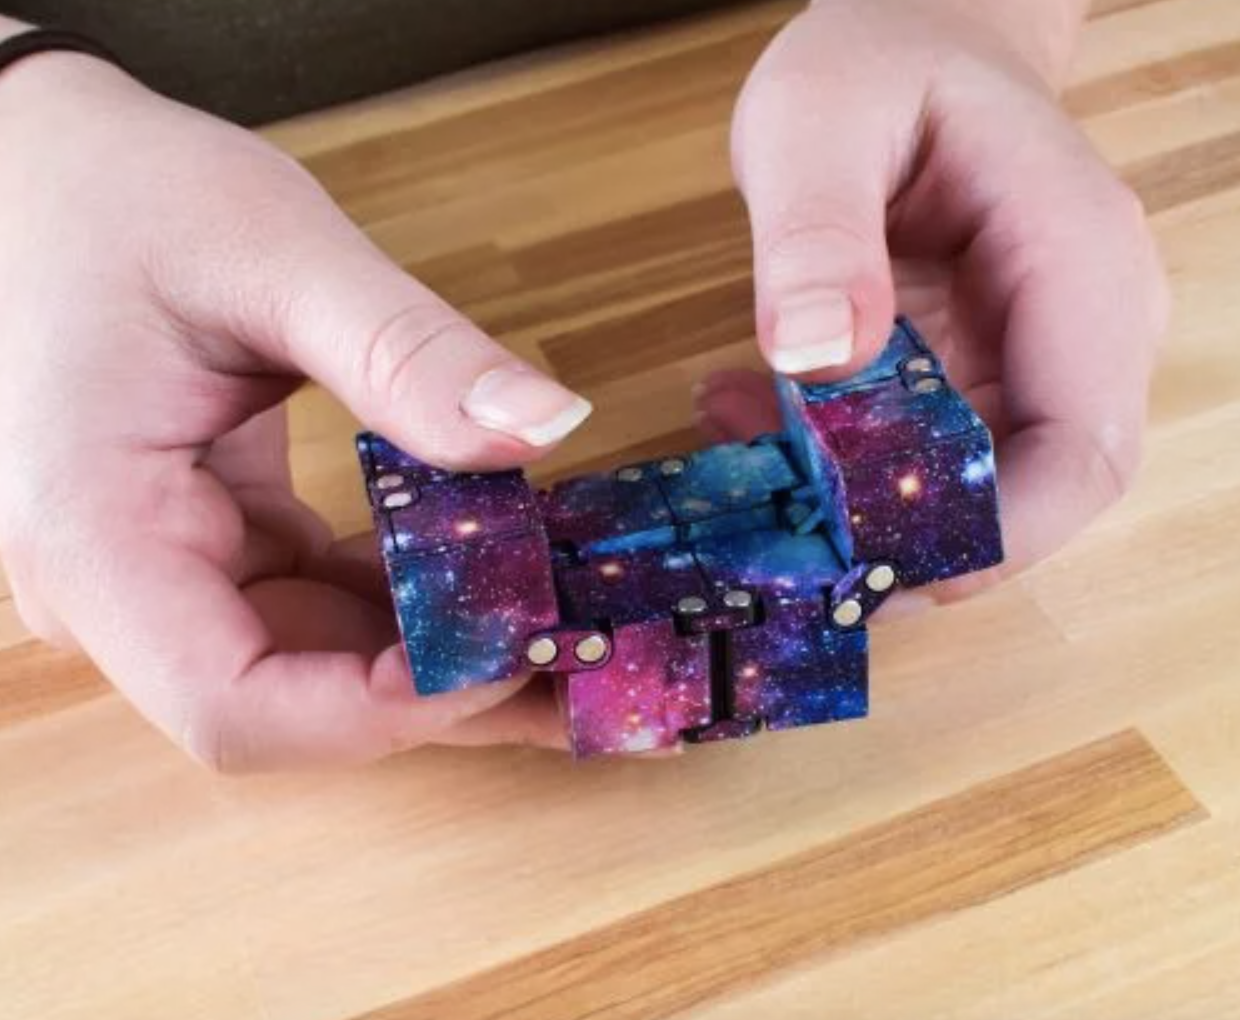 model playing with galaxy-print blue and purple fidget toy